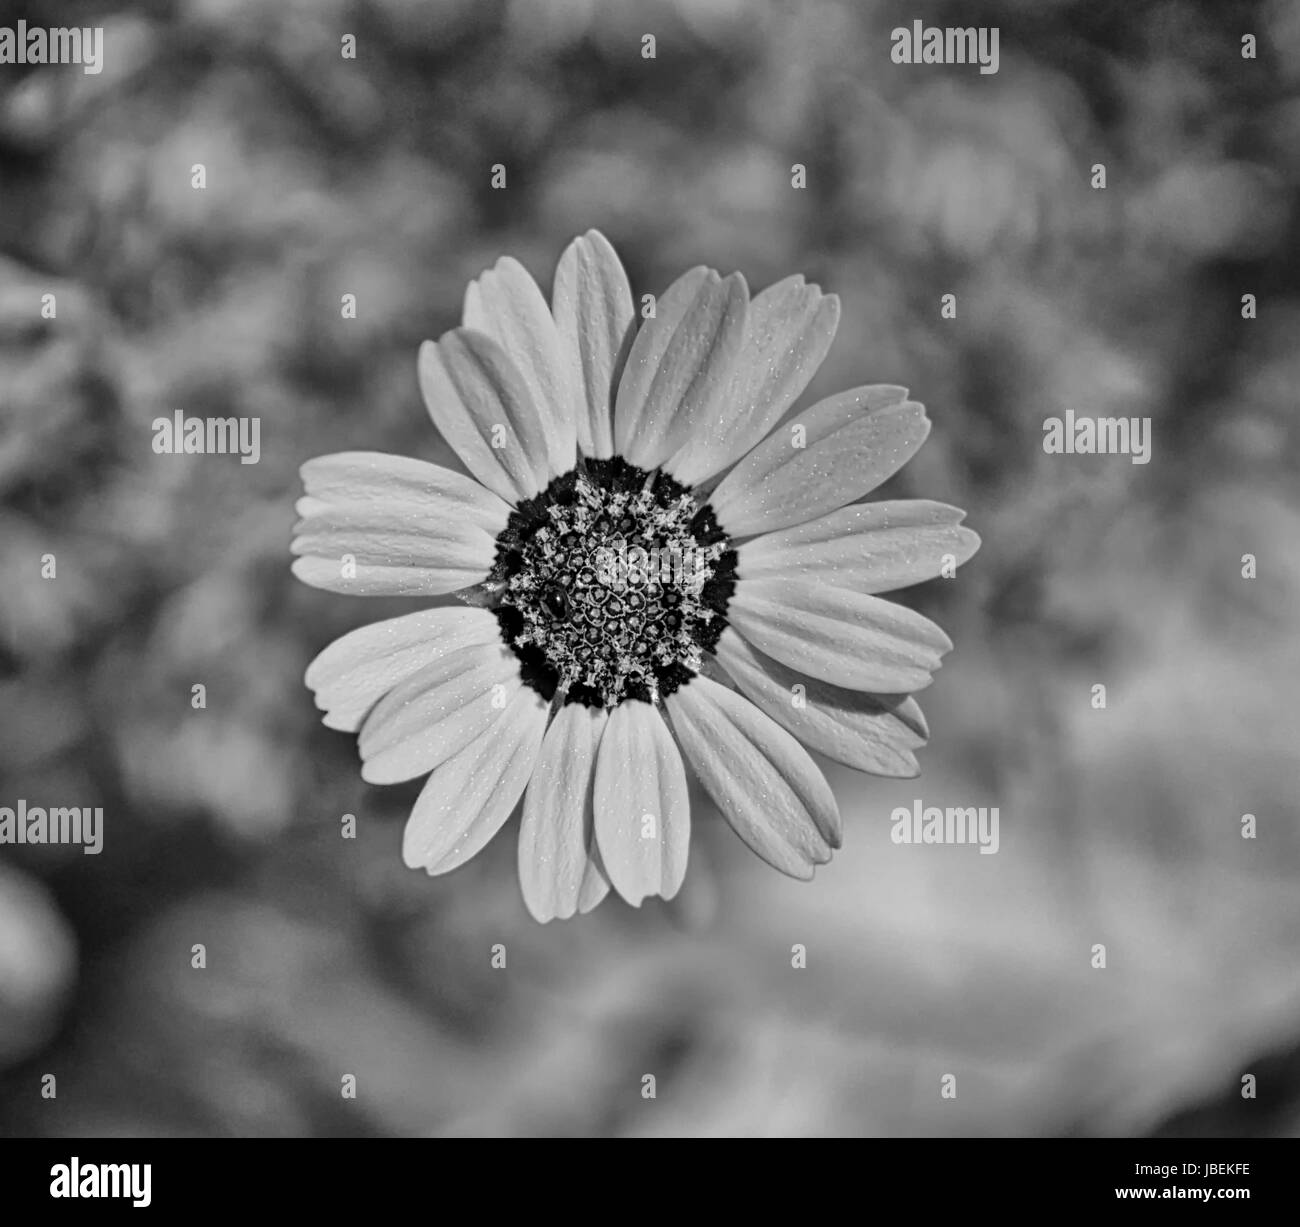 Fynbos flowers Black and White Stock Photos & Images - Alamy